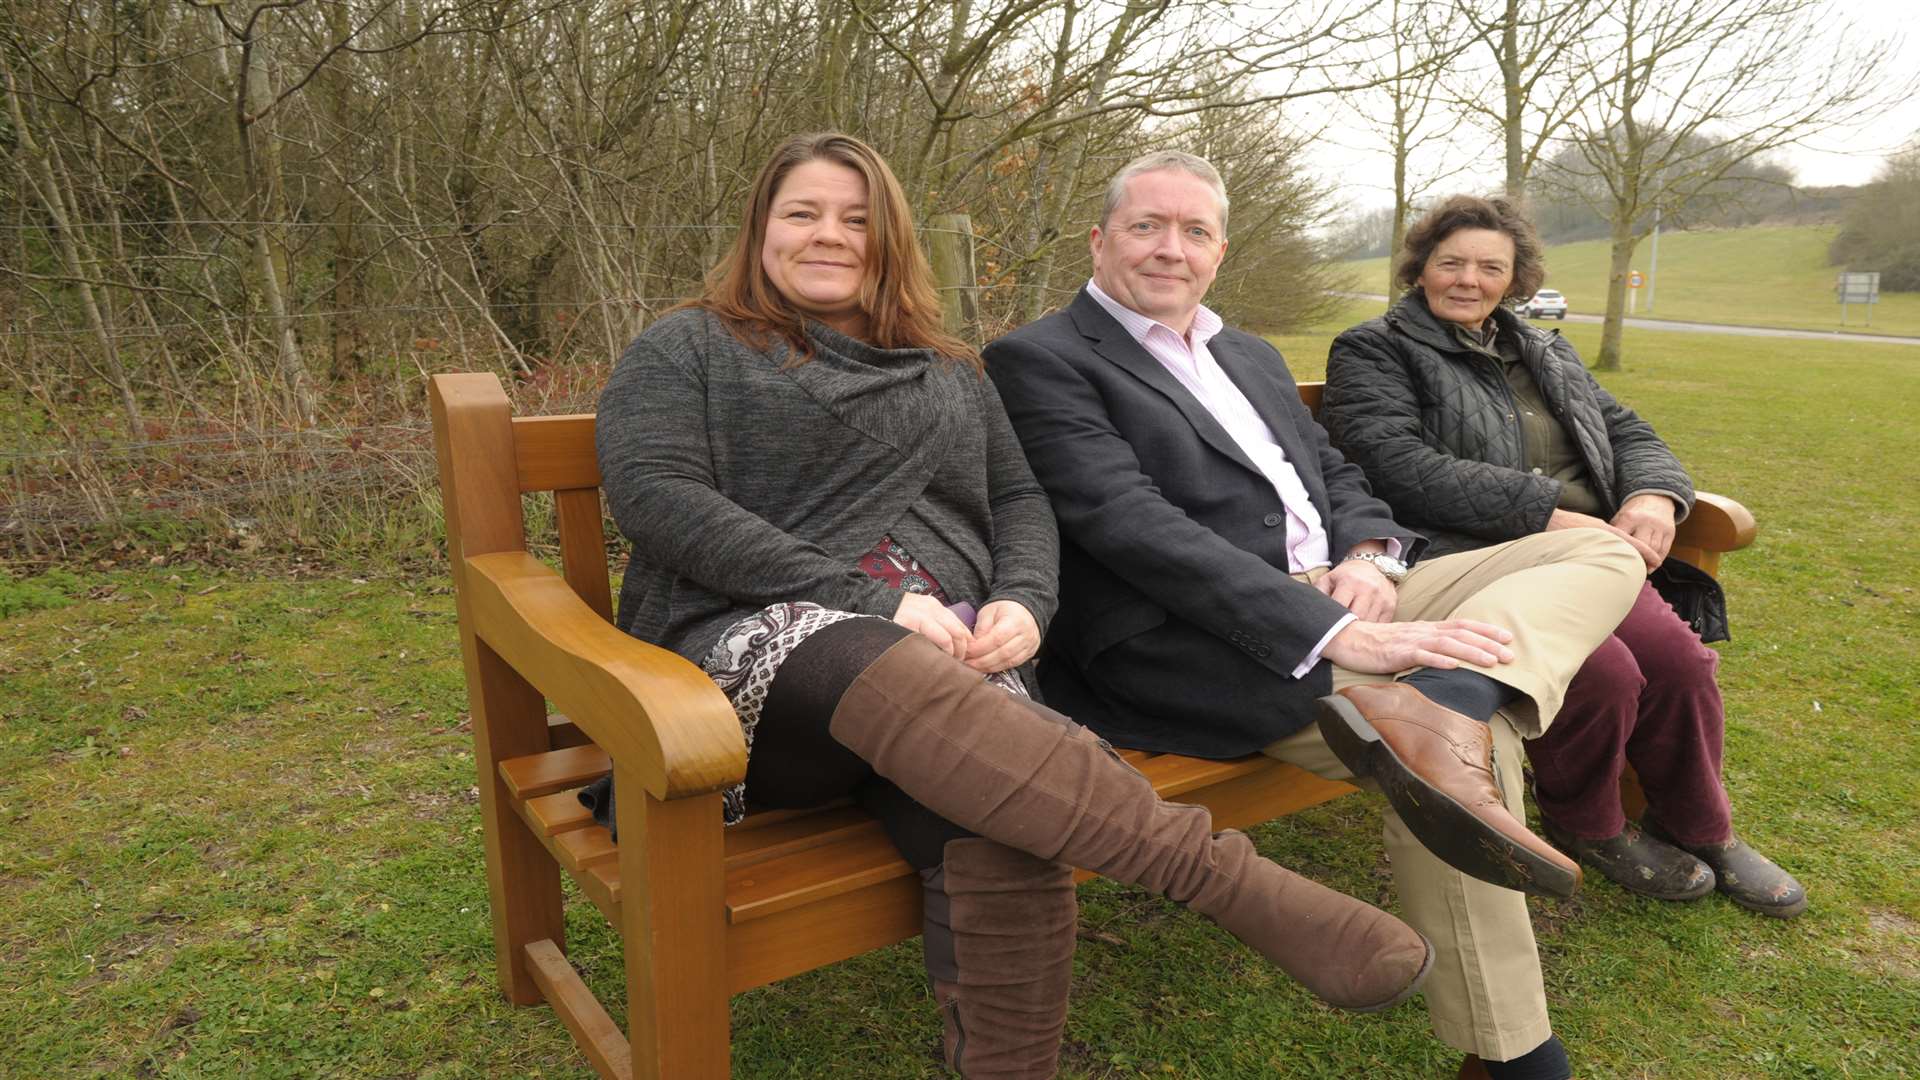 Sarah Williams, Andy Booth and Kathleen Carter from Big Local Eastern Sheppey on a new bench near Rowetts Way rounadbout